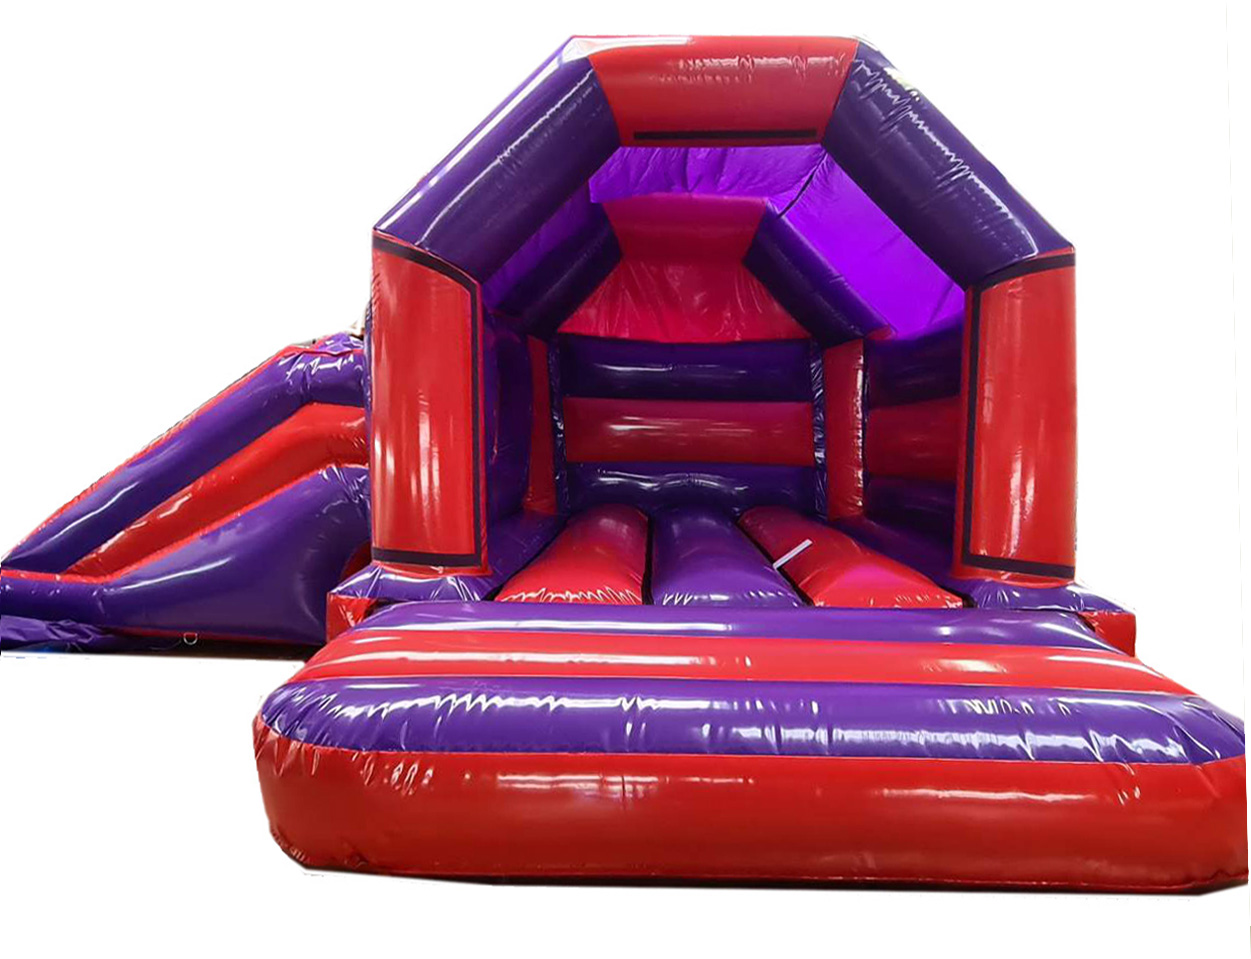 Bouncy Castle Sales - BC591 - Bouncy Inflatable for sale